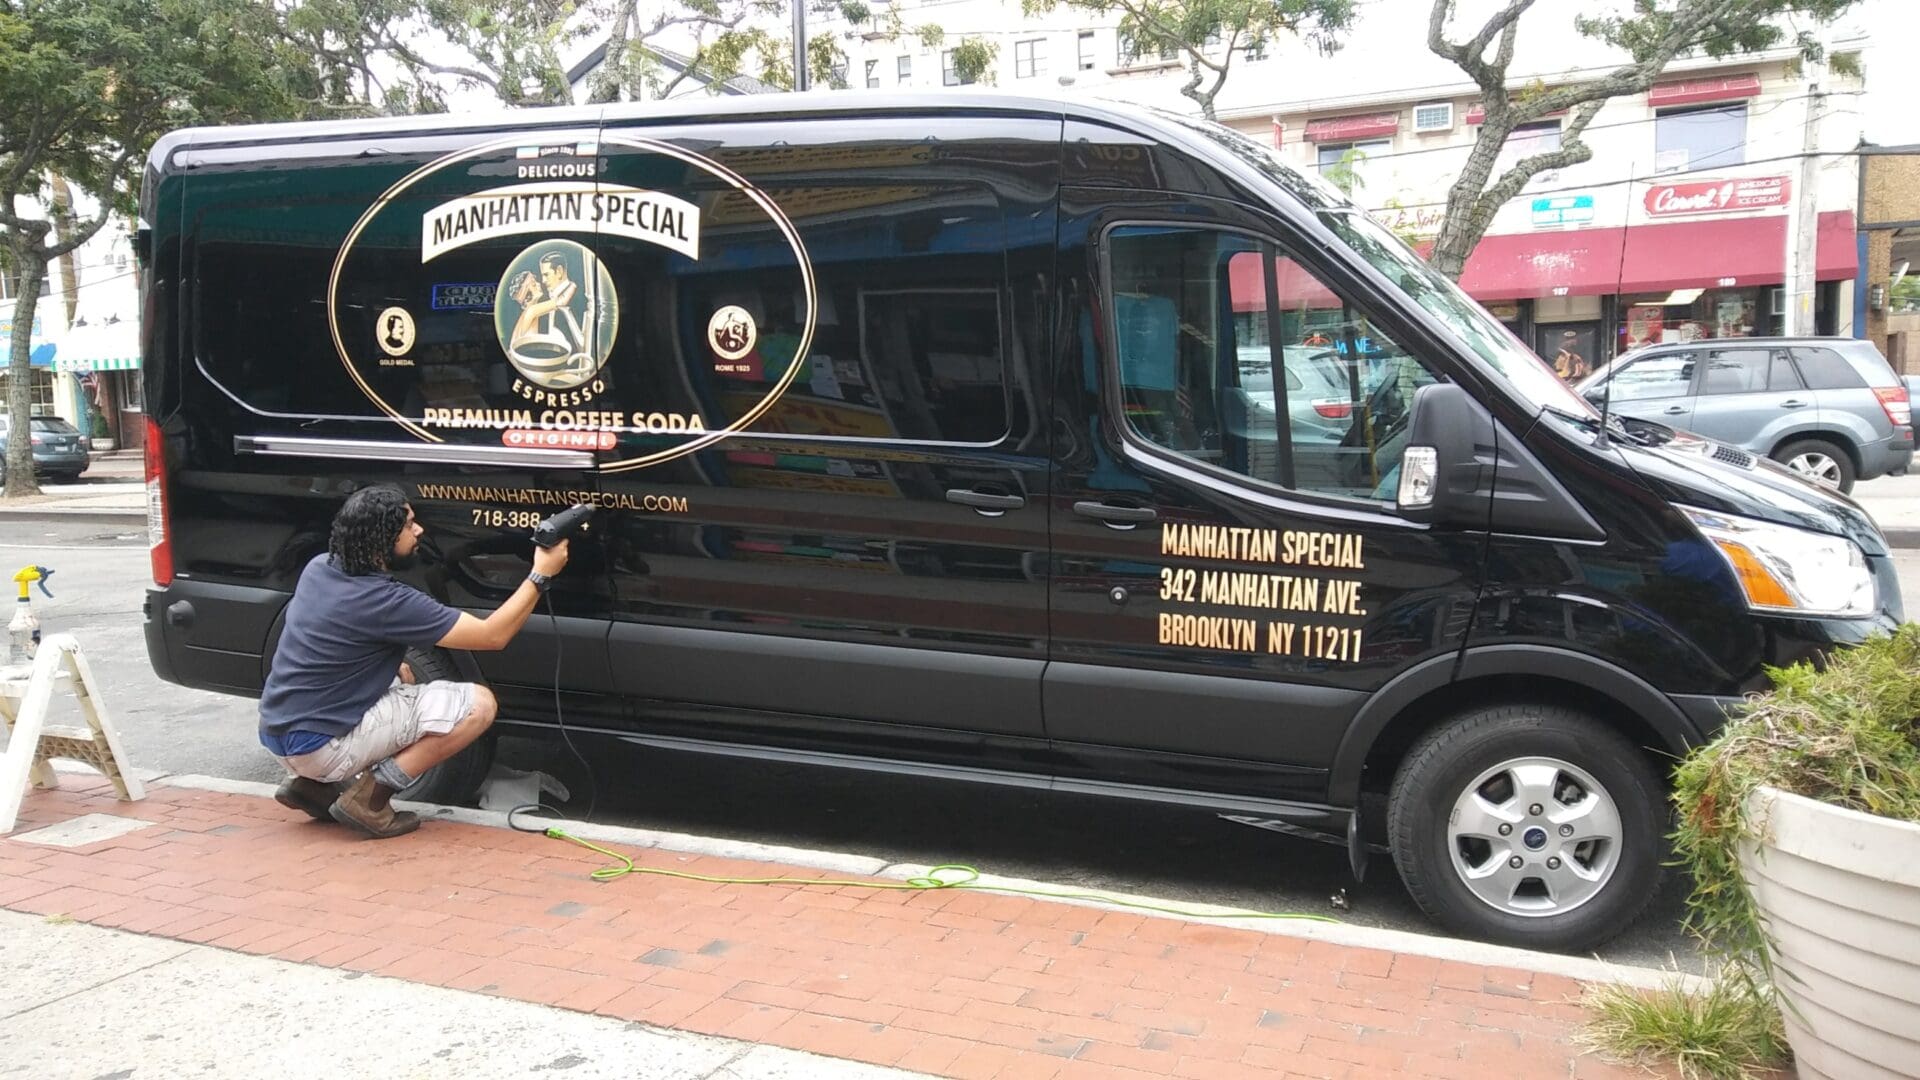 A man applies an advertisement decal for ADP USA Solutions Gallery to a black van parked on a city street.